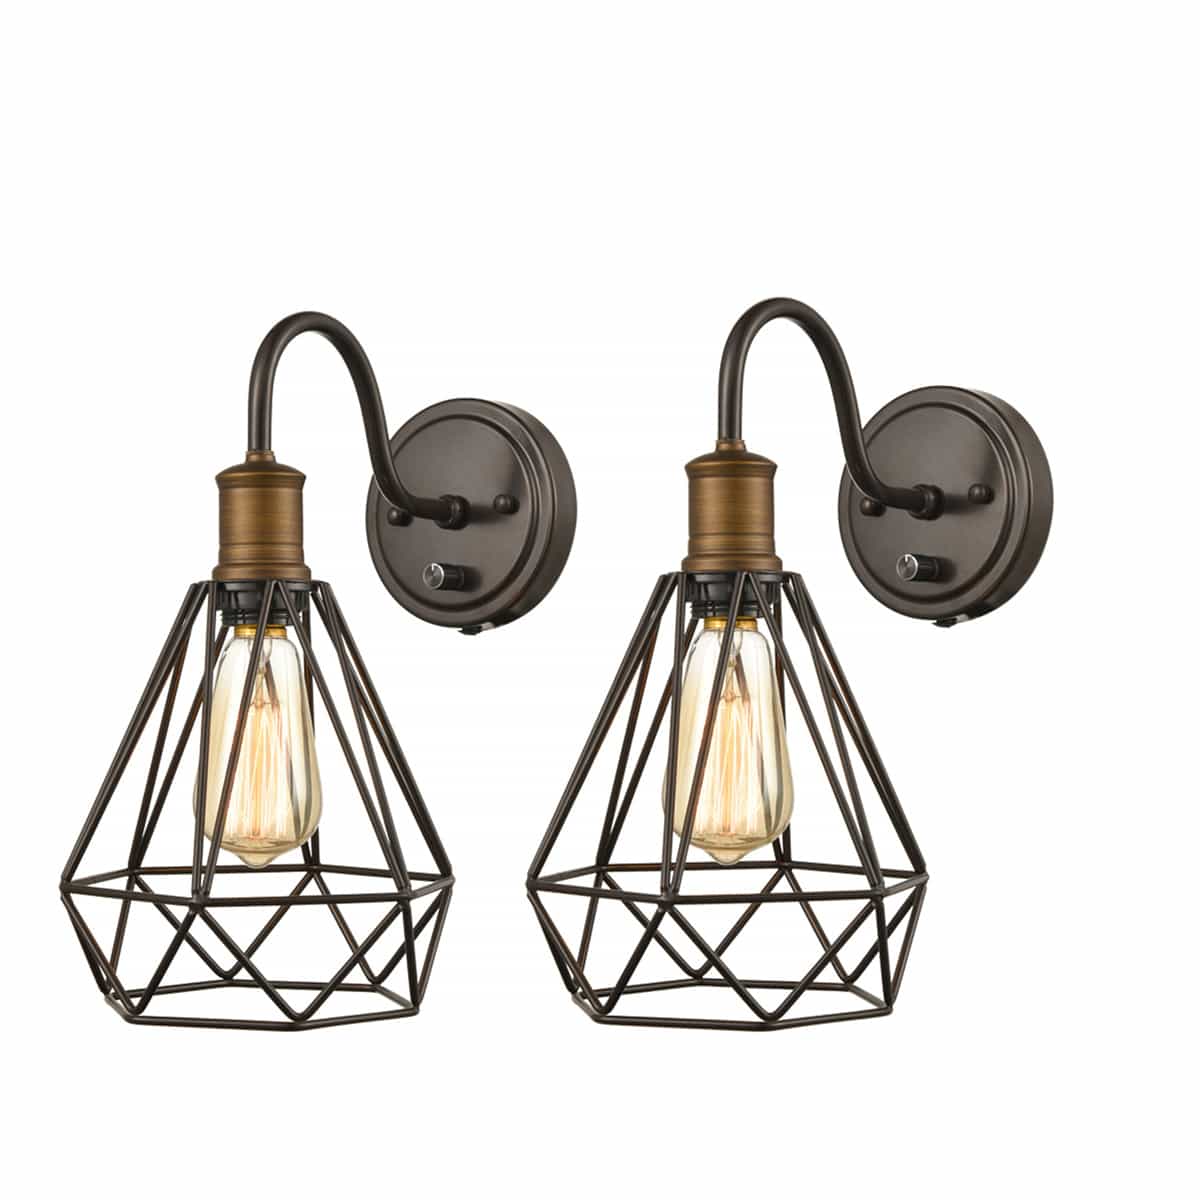 Set of 2 Industrial Wall Sconce Vintage Black Metal Cage Wall Lamp Light Fixture